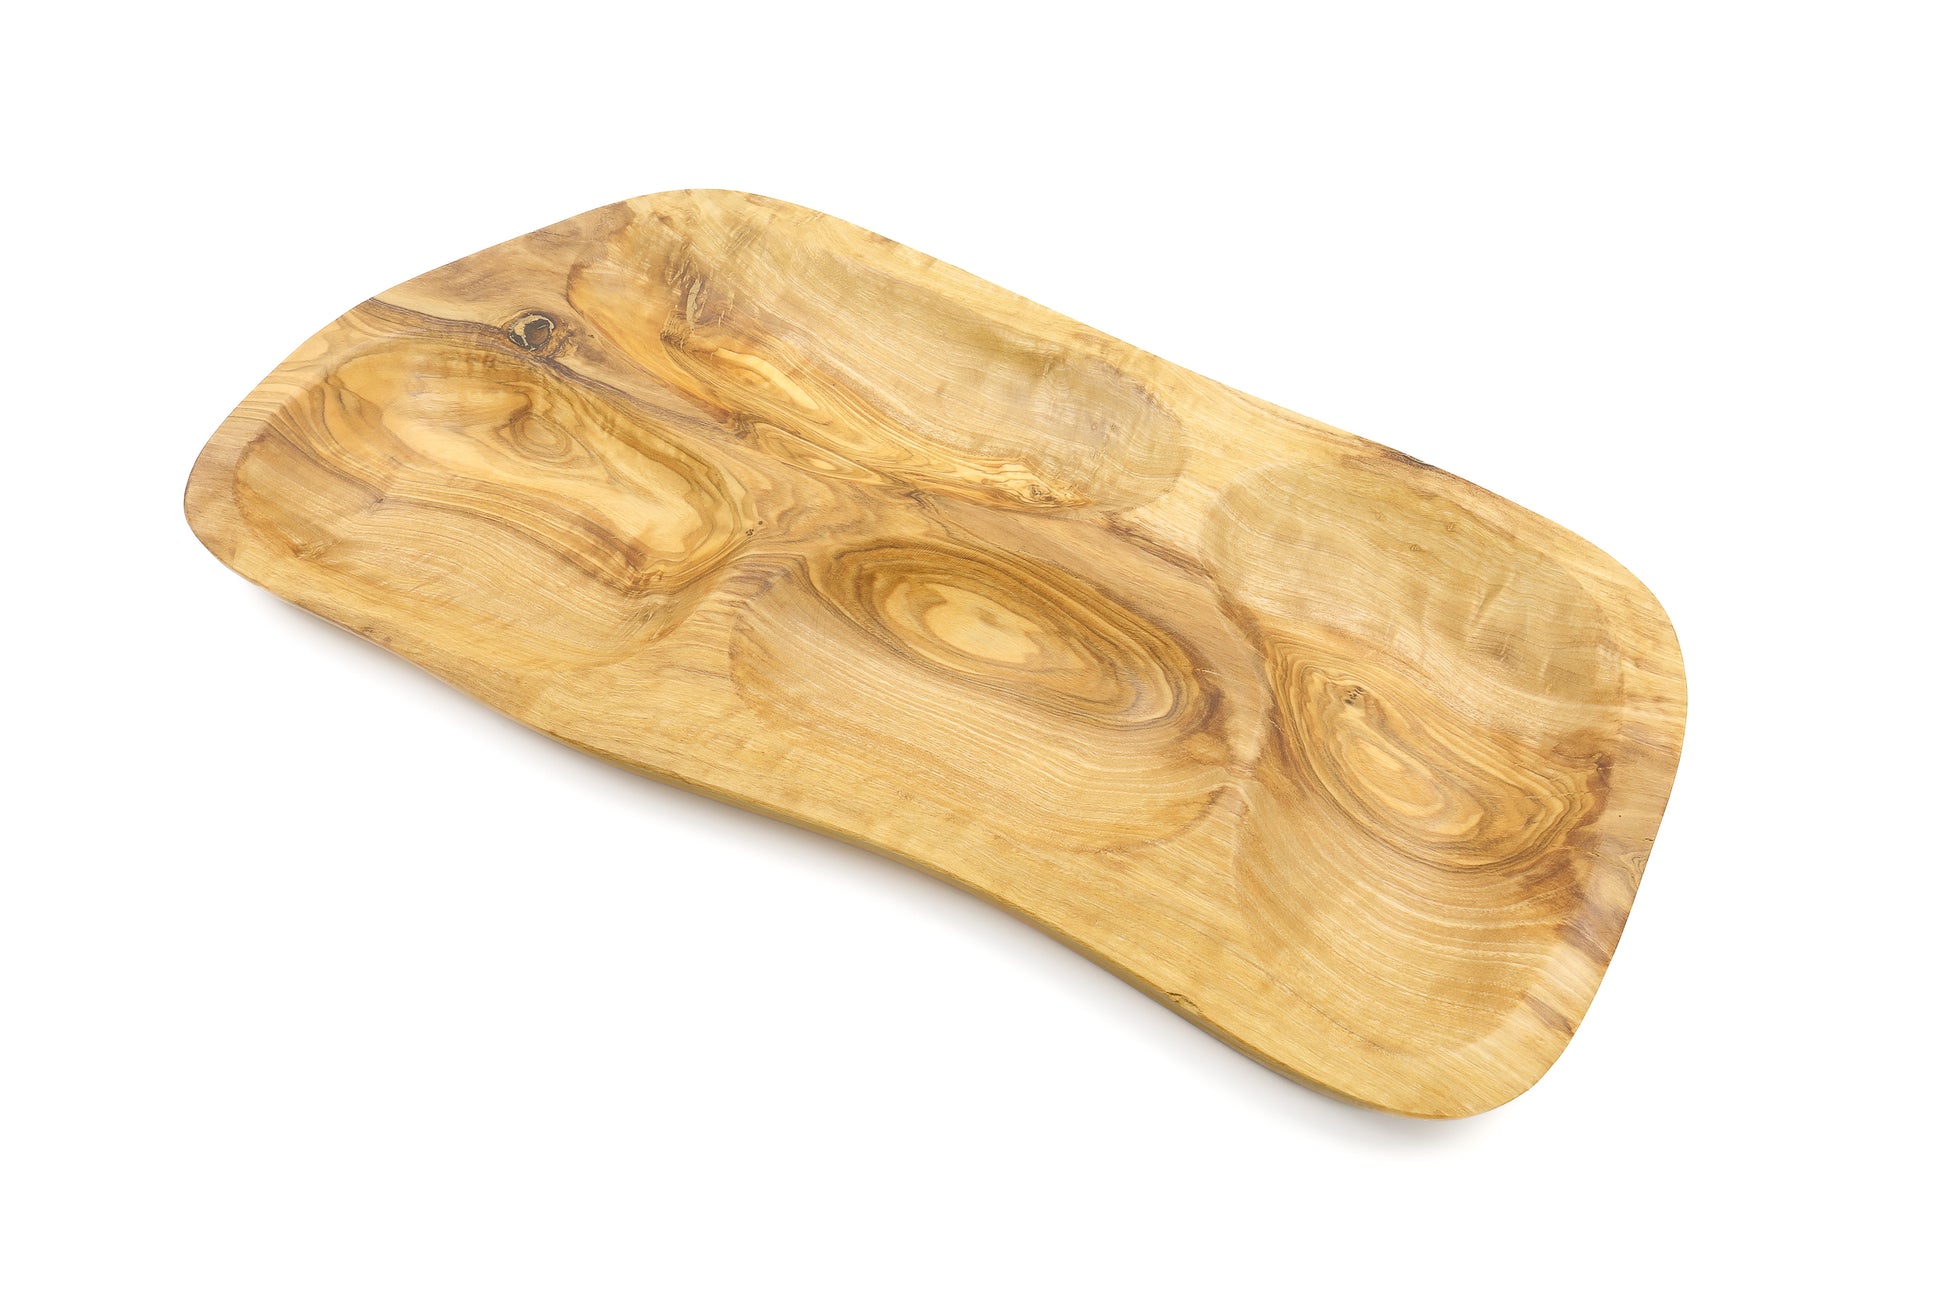 Natural olive wood appetizer tray with an irregular shape and sectional divisions